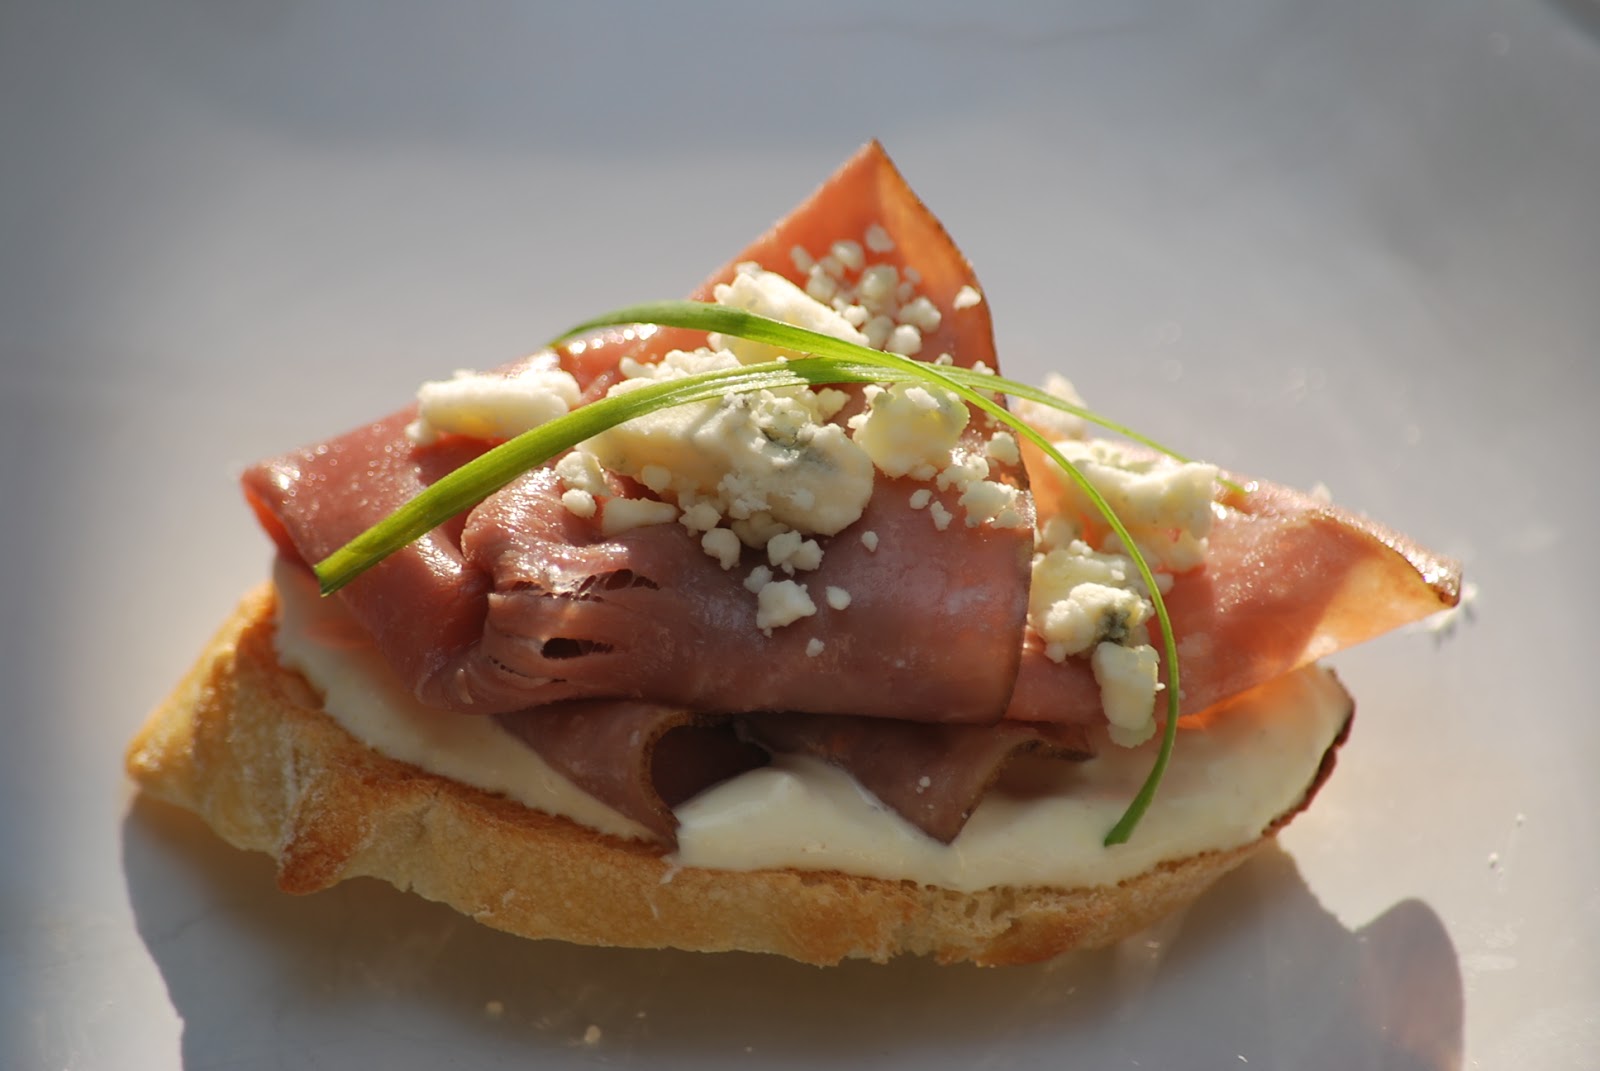 My story in recipes: Beef and Blue Crostini